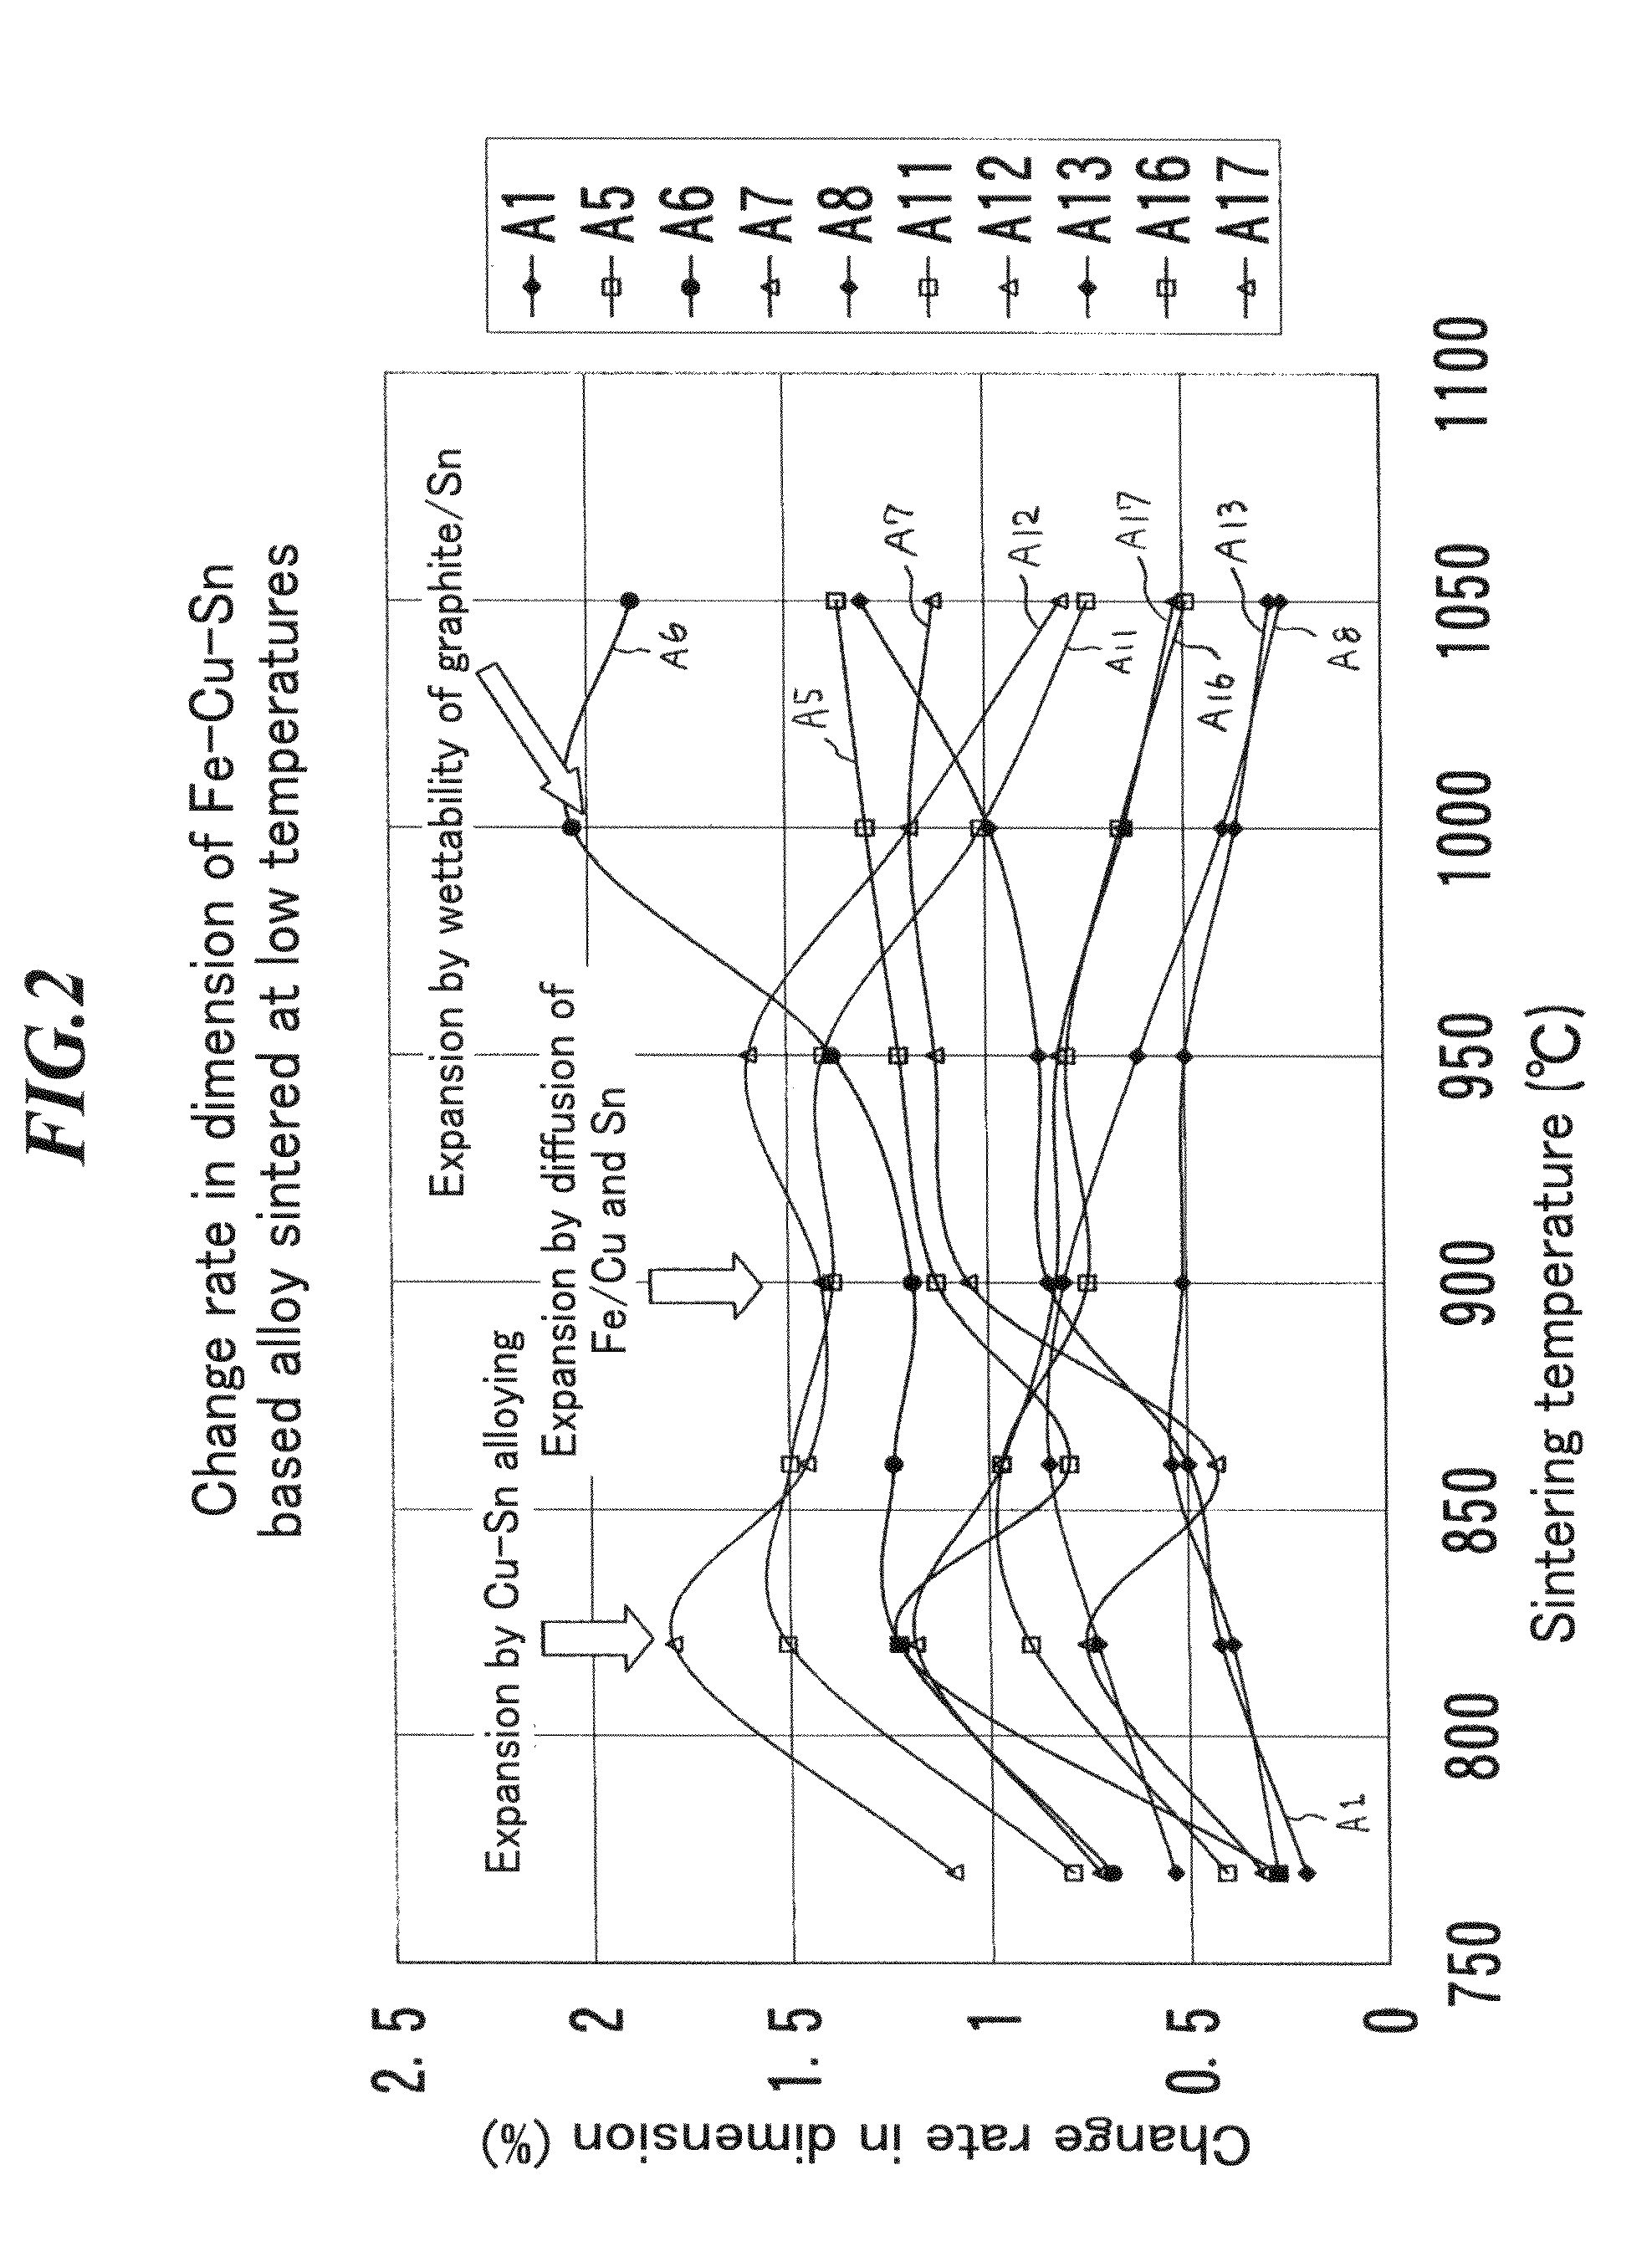 Ferrous Sintered Multilayer Roll-Formed Bushing, Producing Method of the Same and Connecting Device